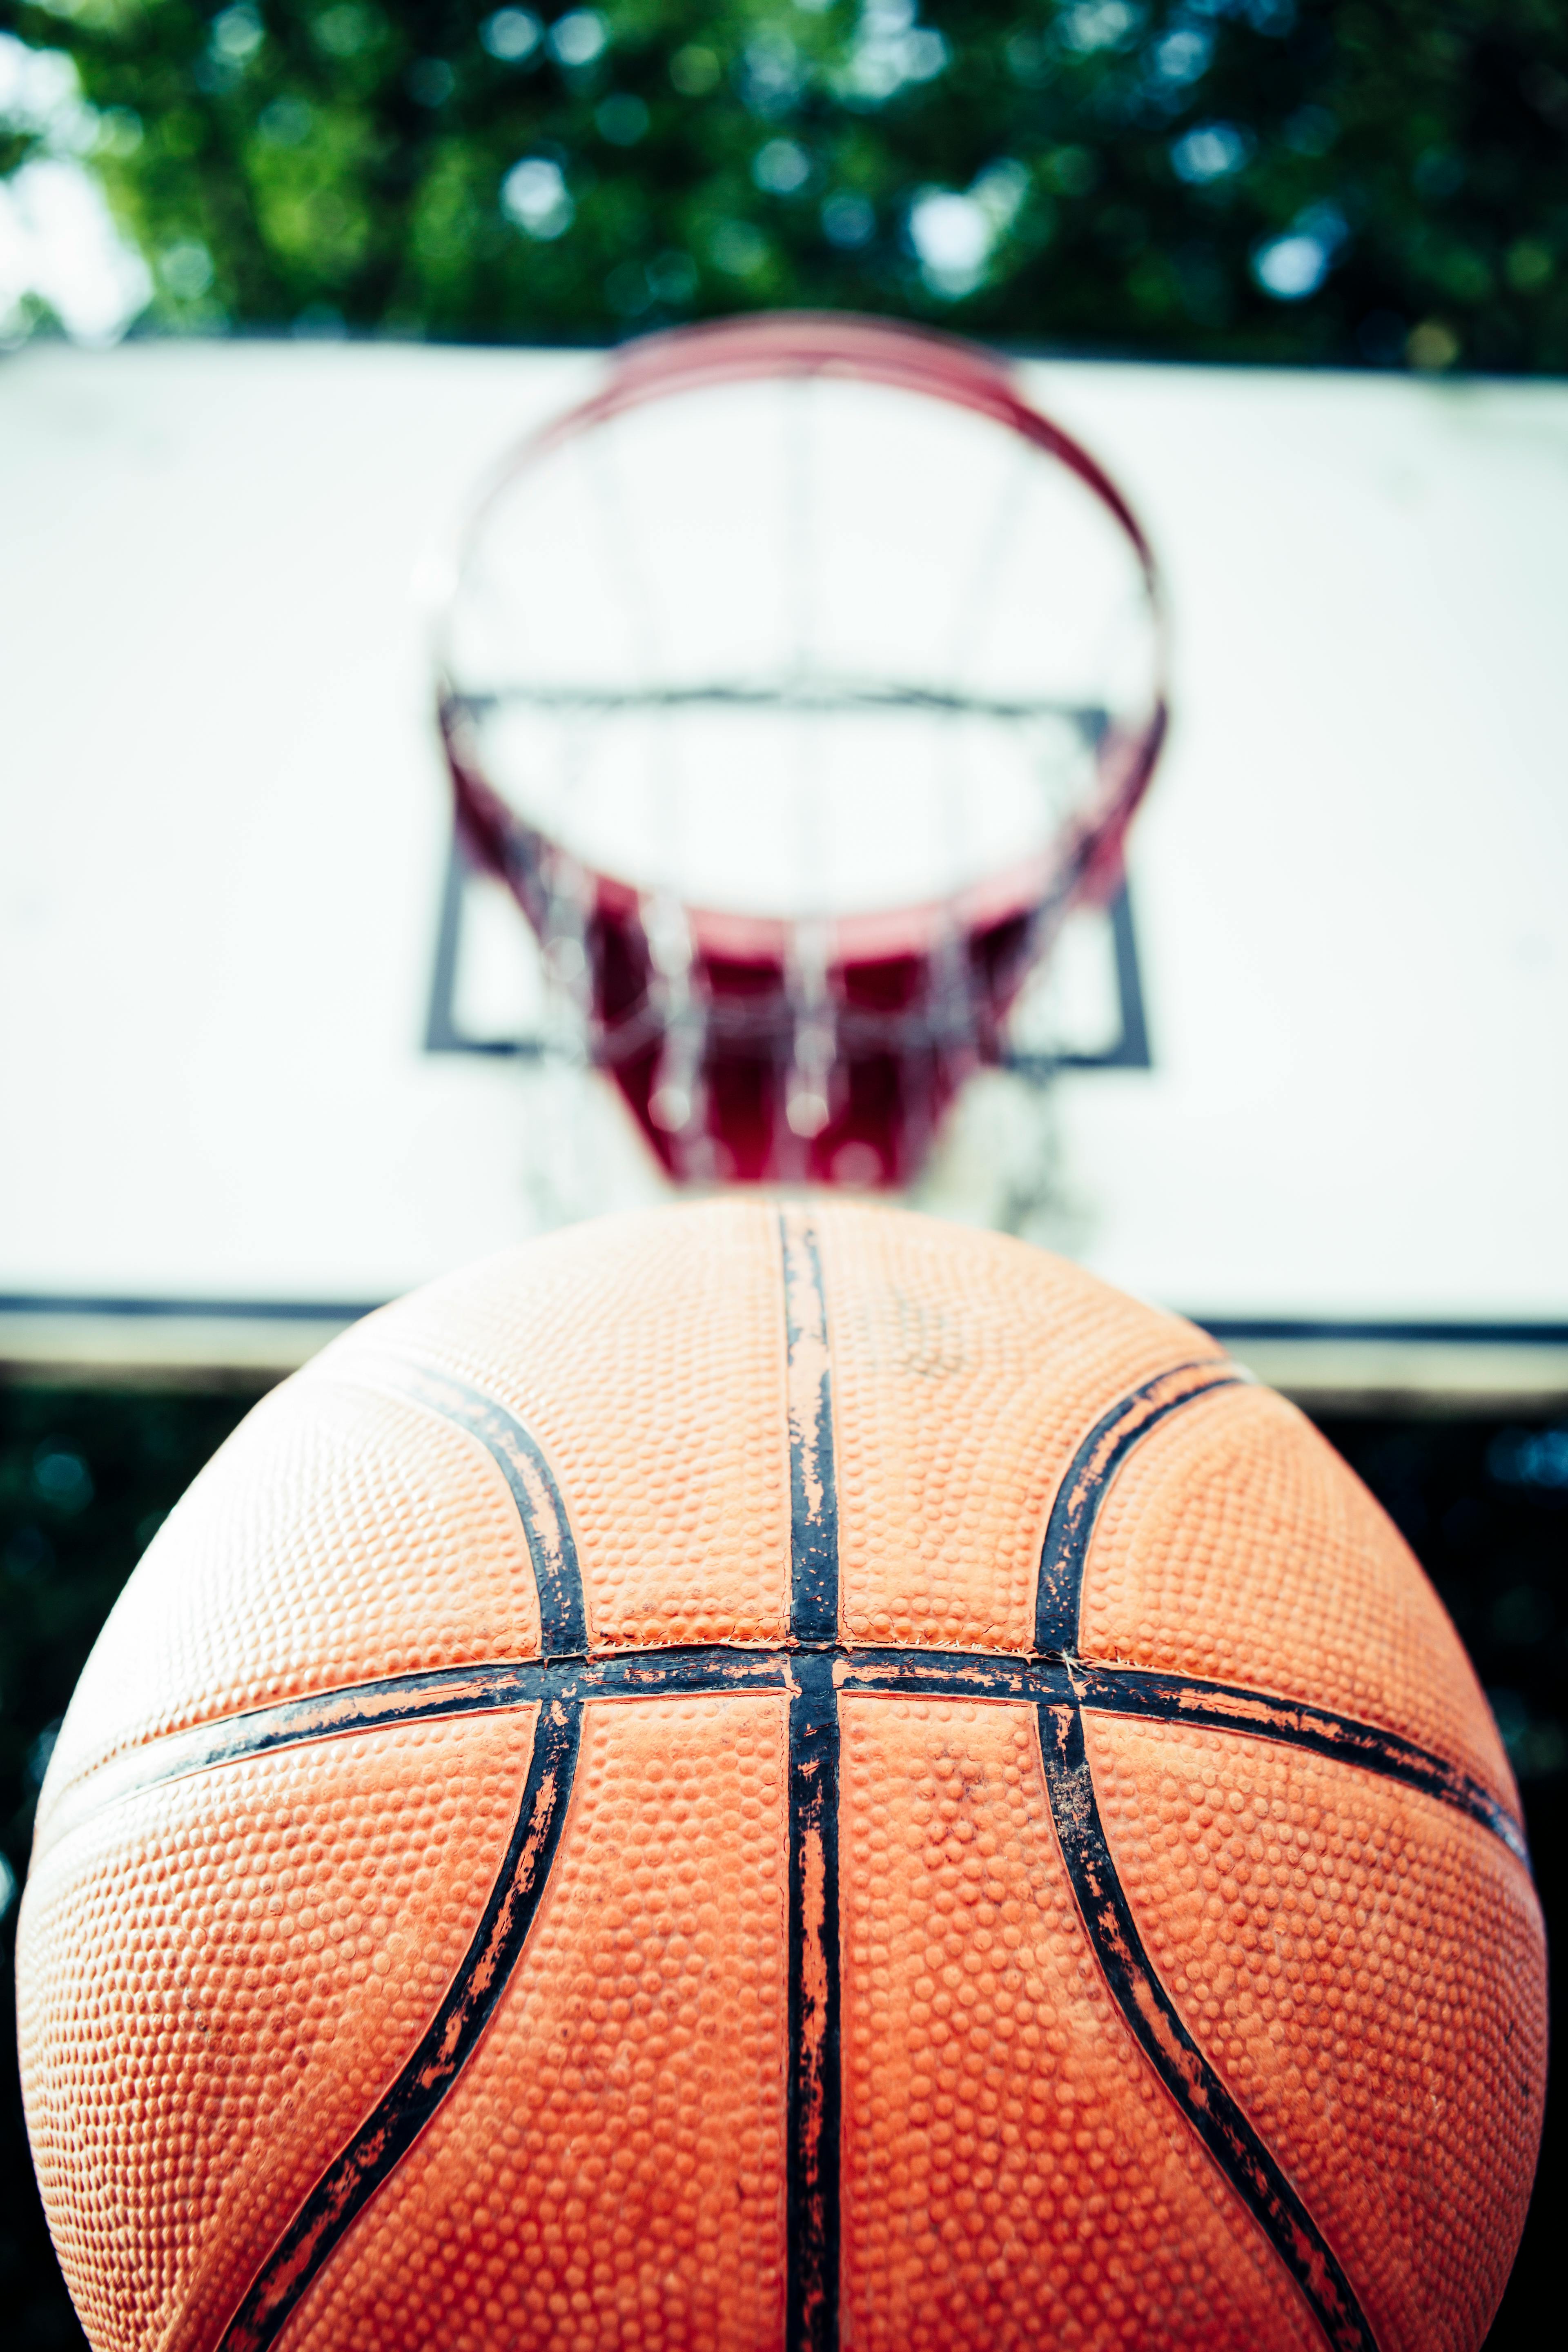 Cell Phone Wallpaper For Basketball Boys Images Free Download on Lovepik   400341989